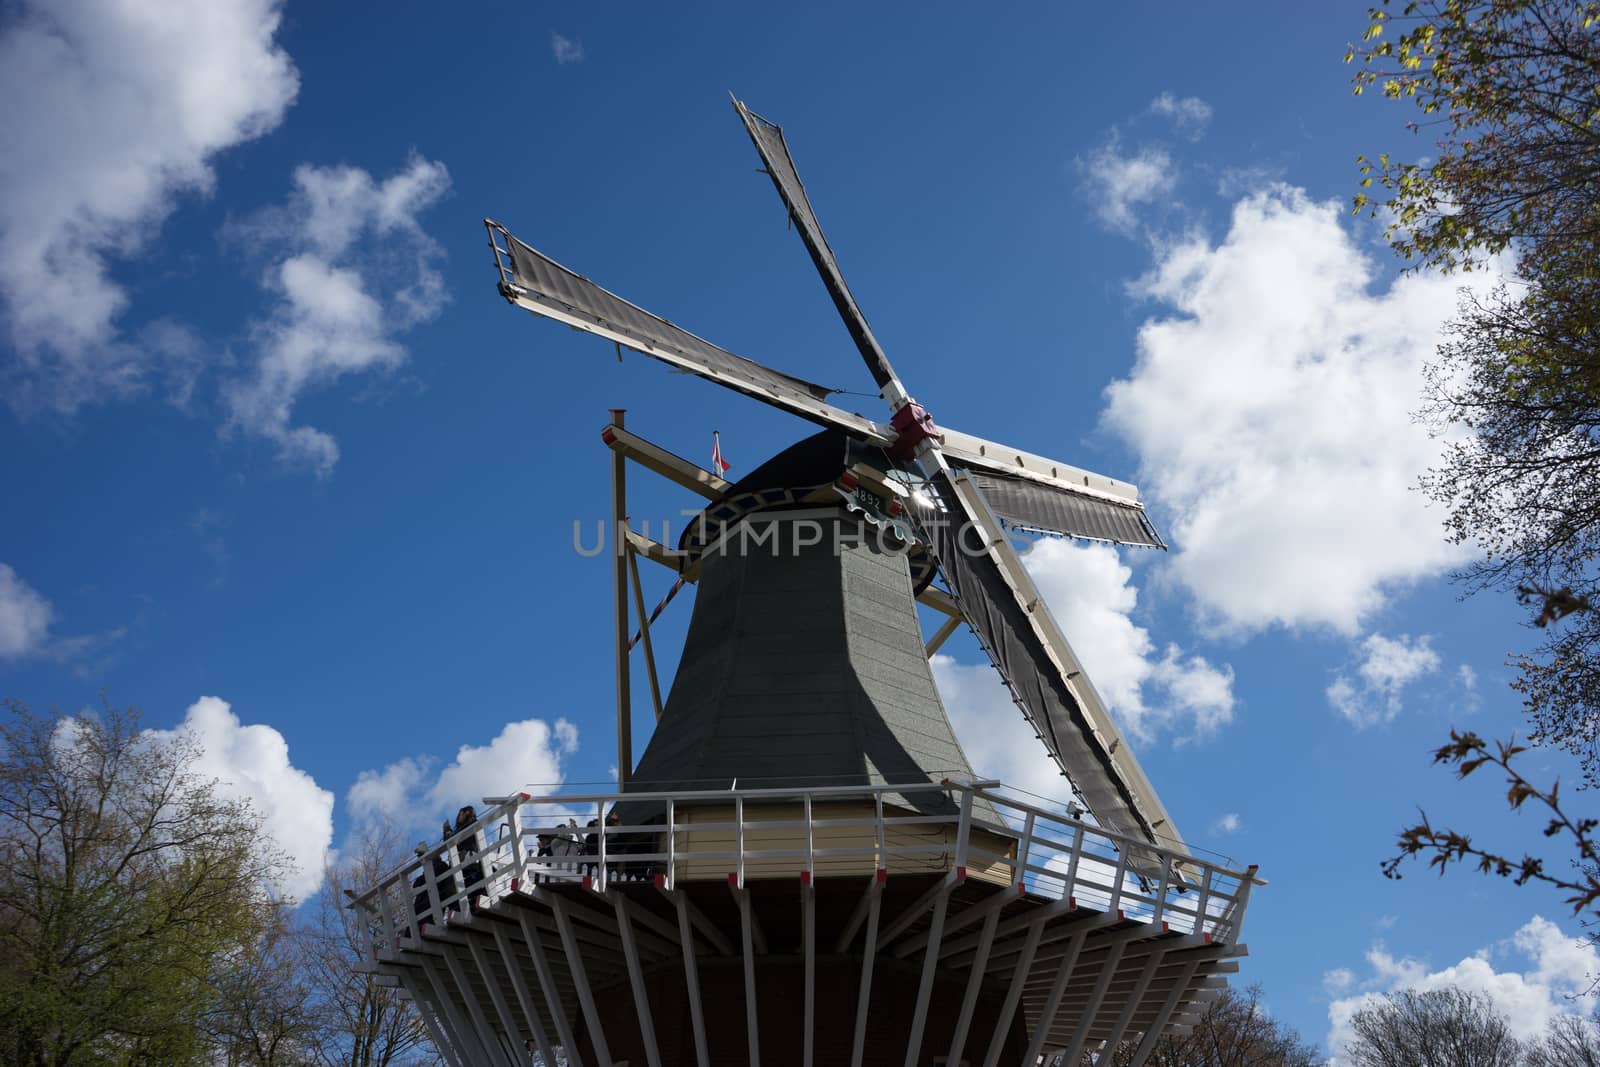 Ancient Dutch Windmill with a blue sky background in Lisse, Netherlands, Europe on a bright summer day